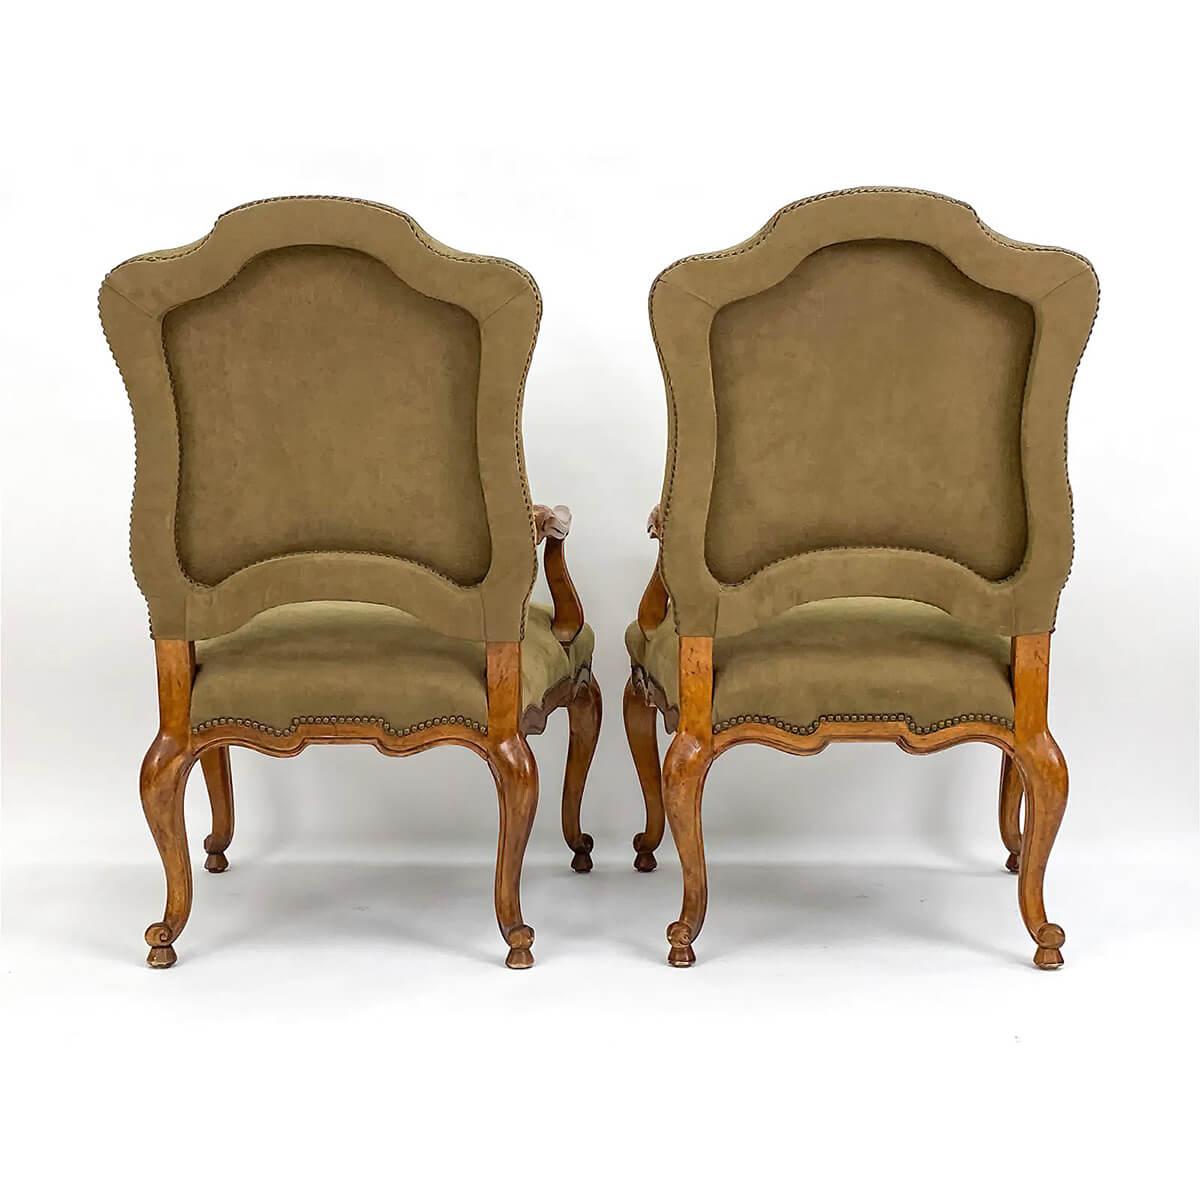 20th Century Pair of French Provincial Antique Armchairs